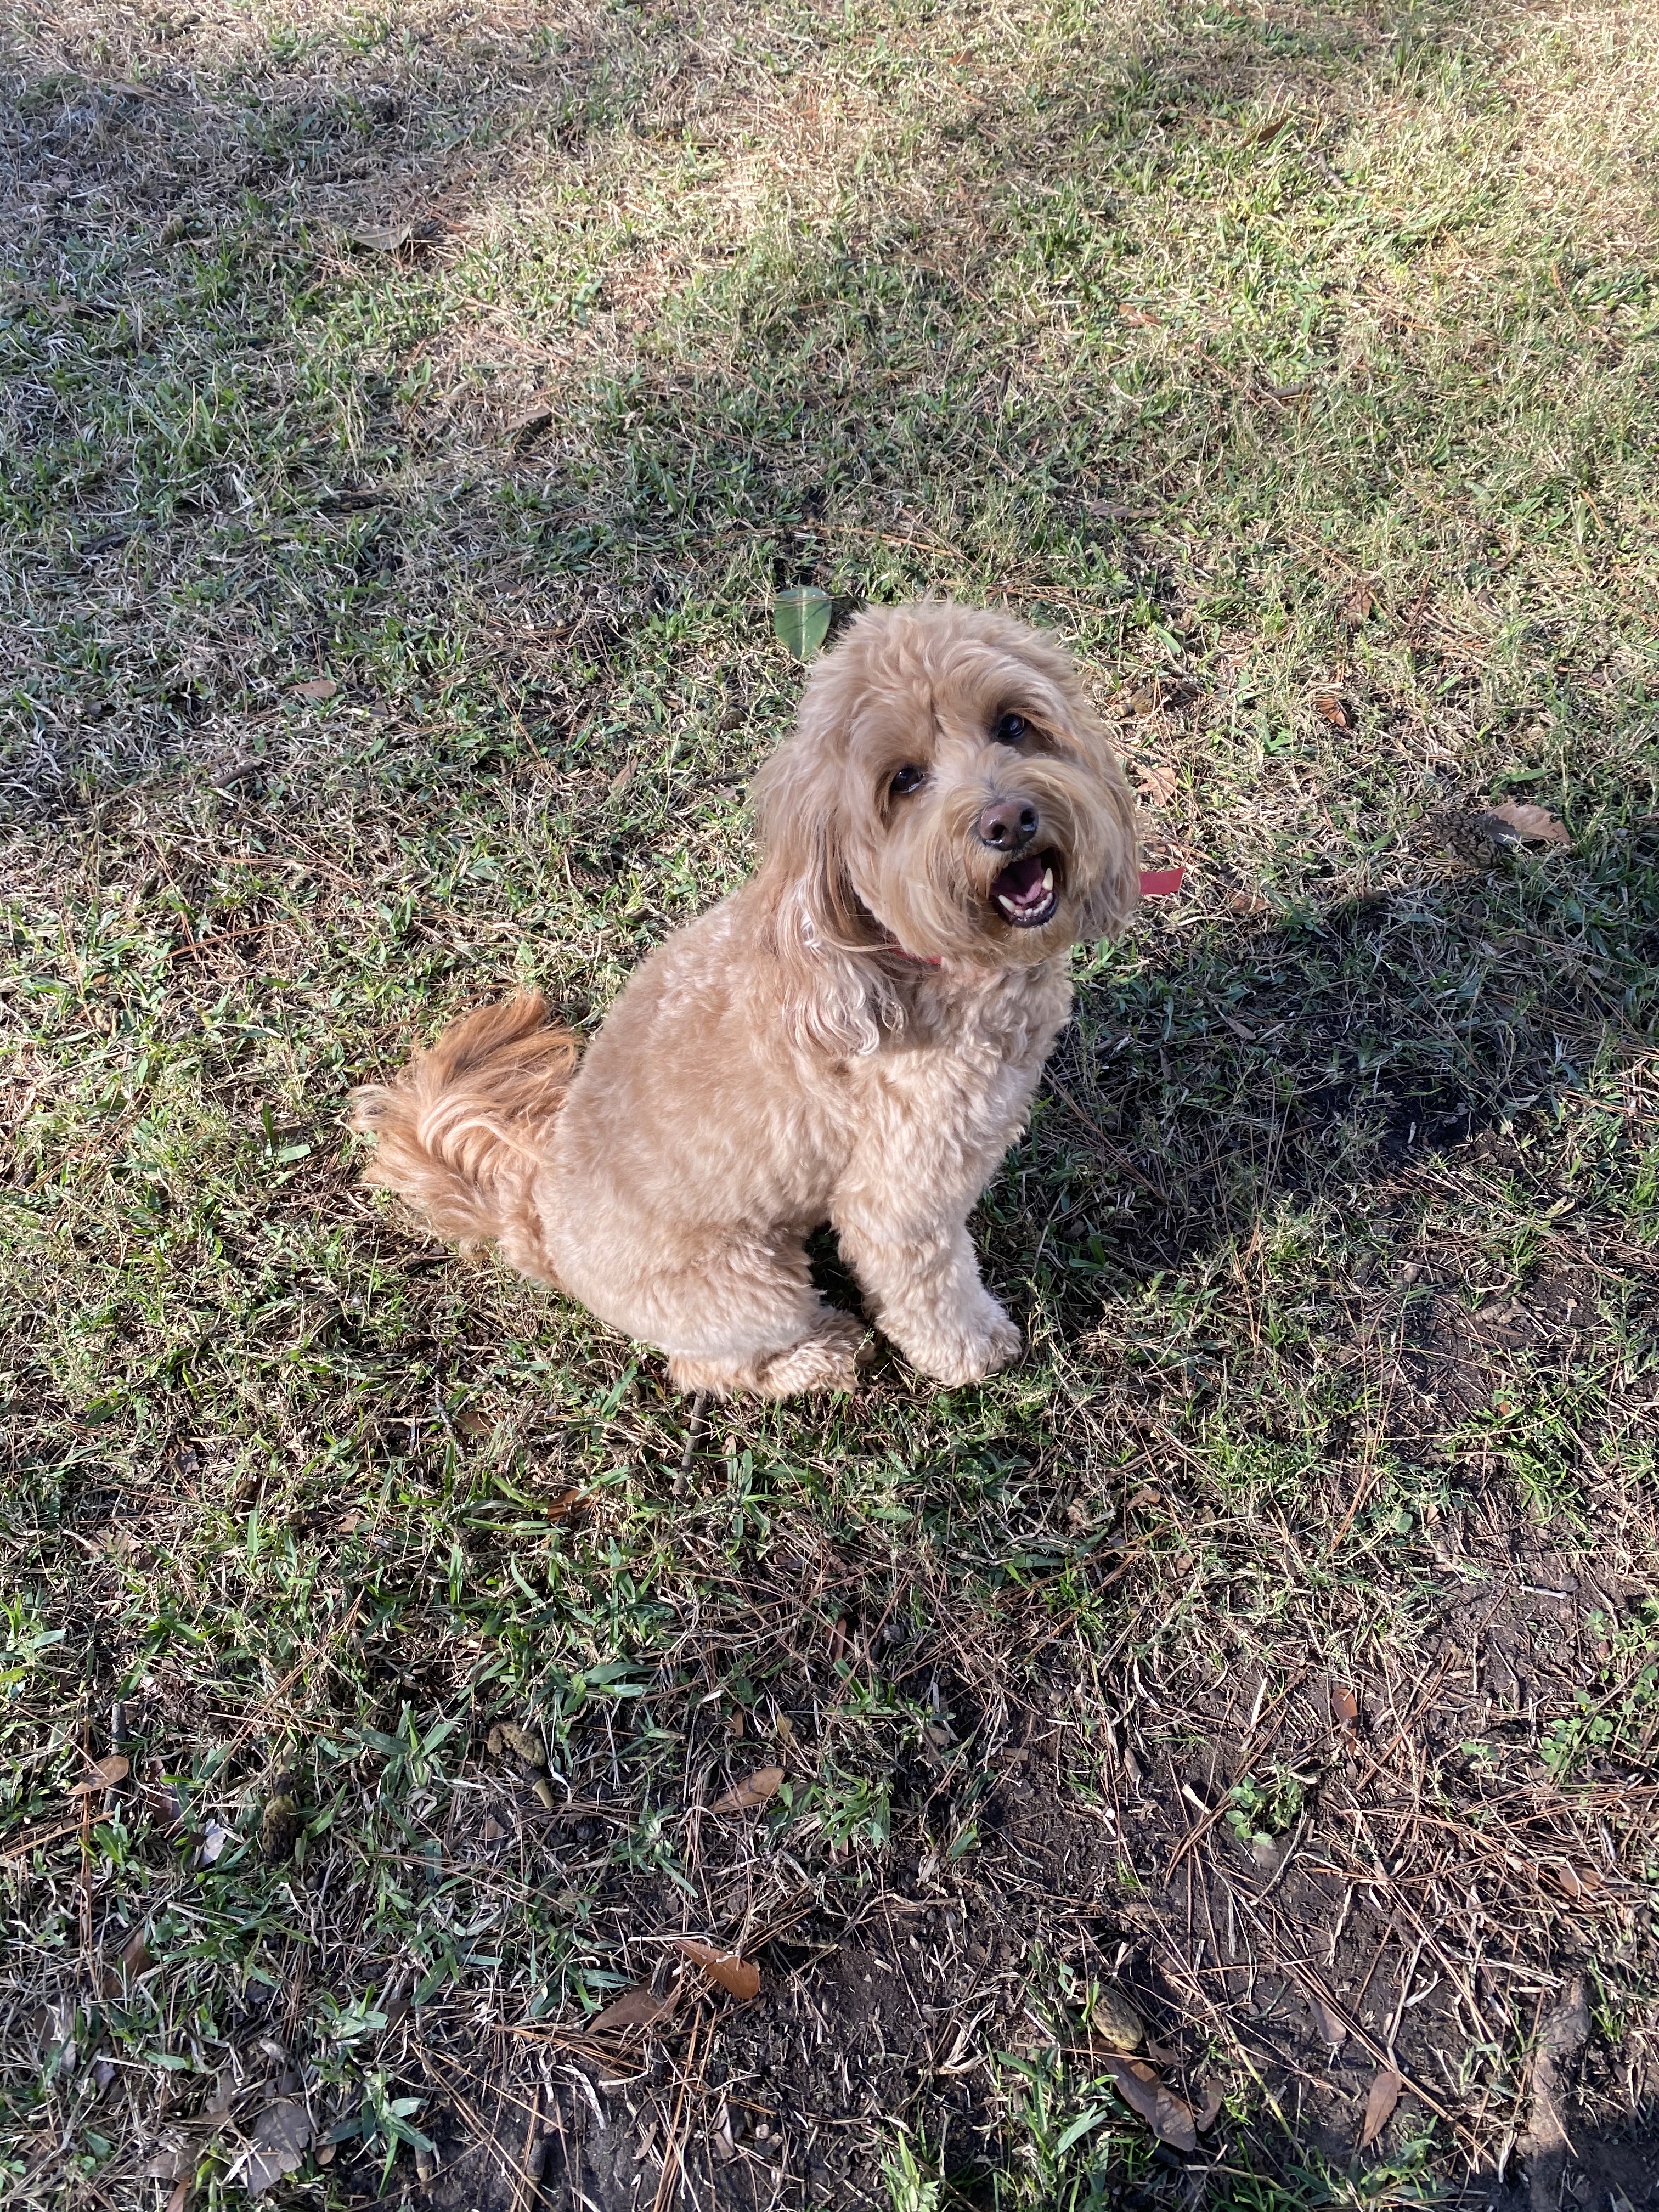 This is Rosy.Rosy is a minidoodle. Her fur is goldenbrown.